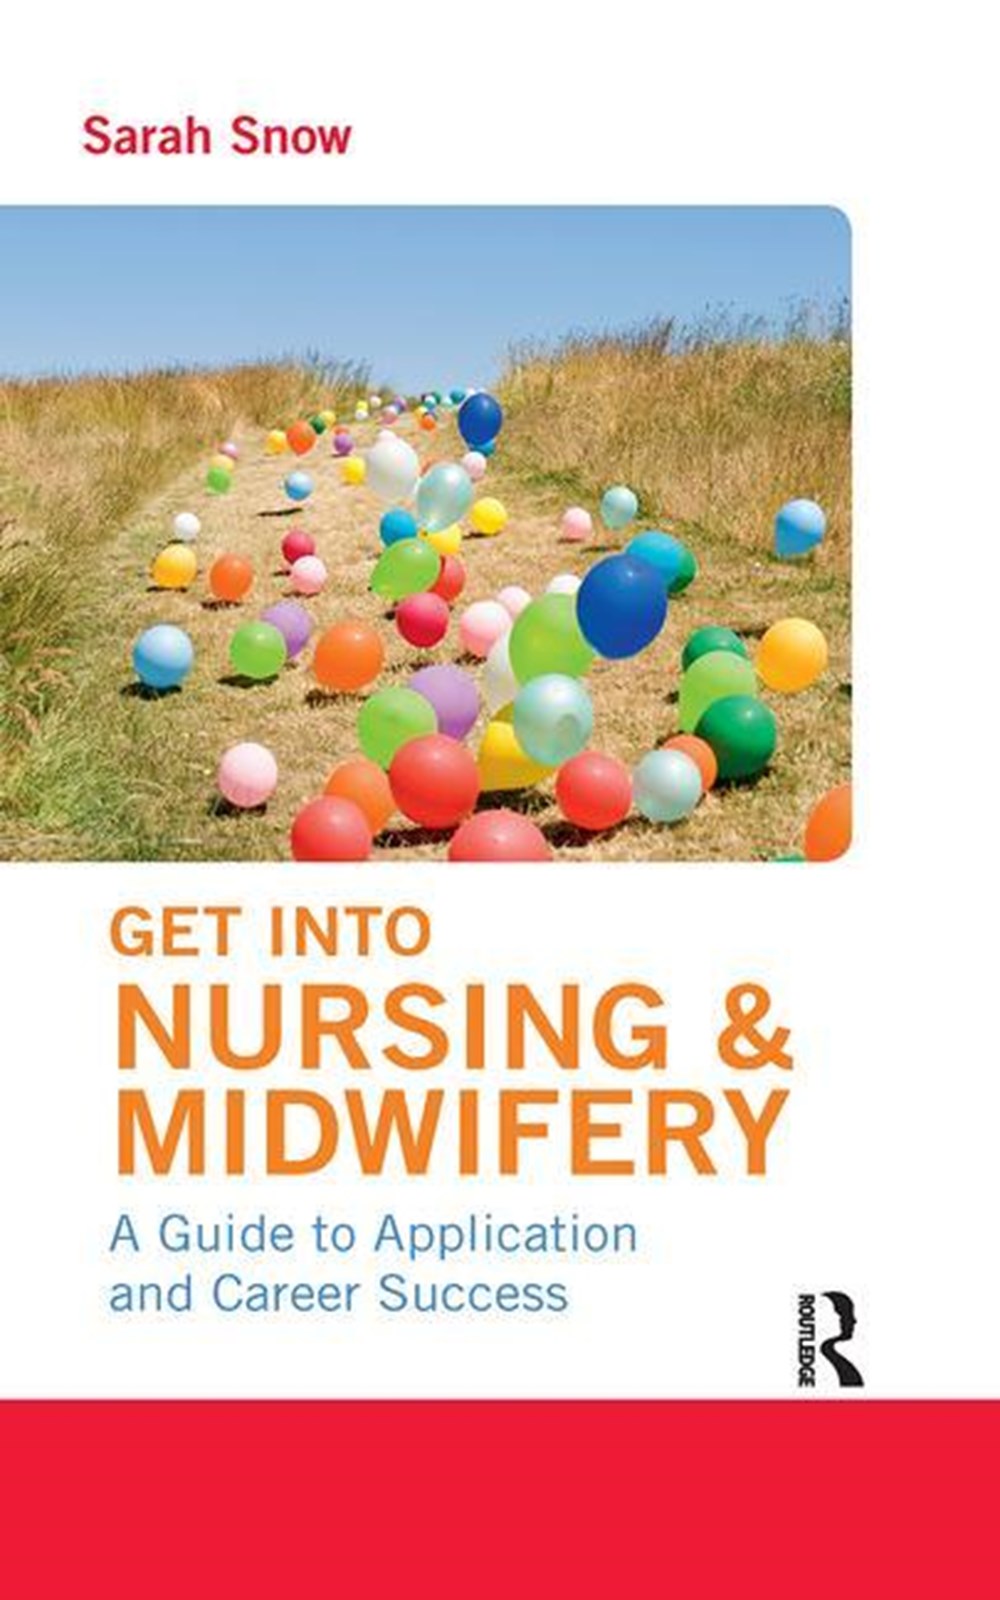 Get Into Nursing & Midwifery: A Guide to Application and Career Success